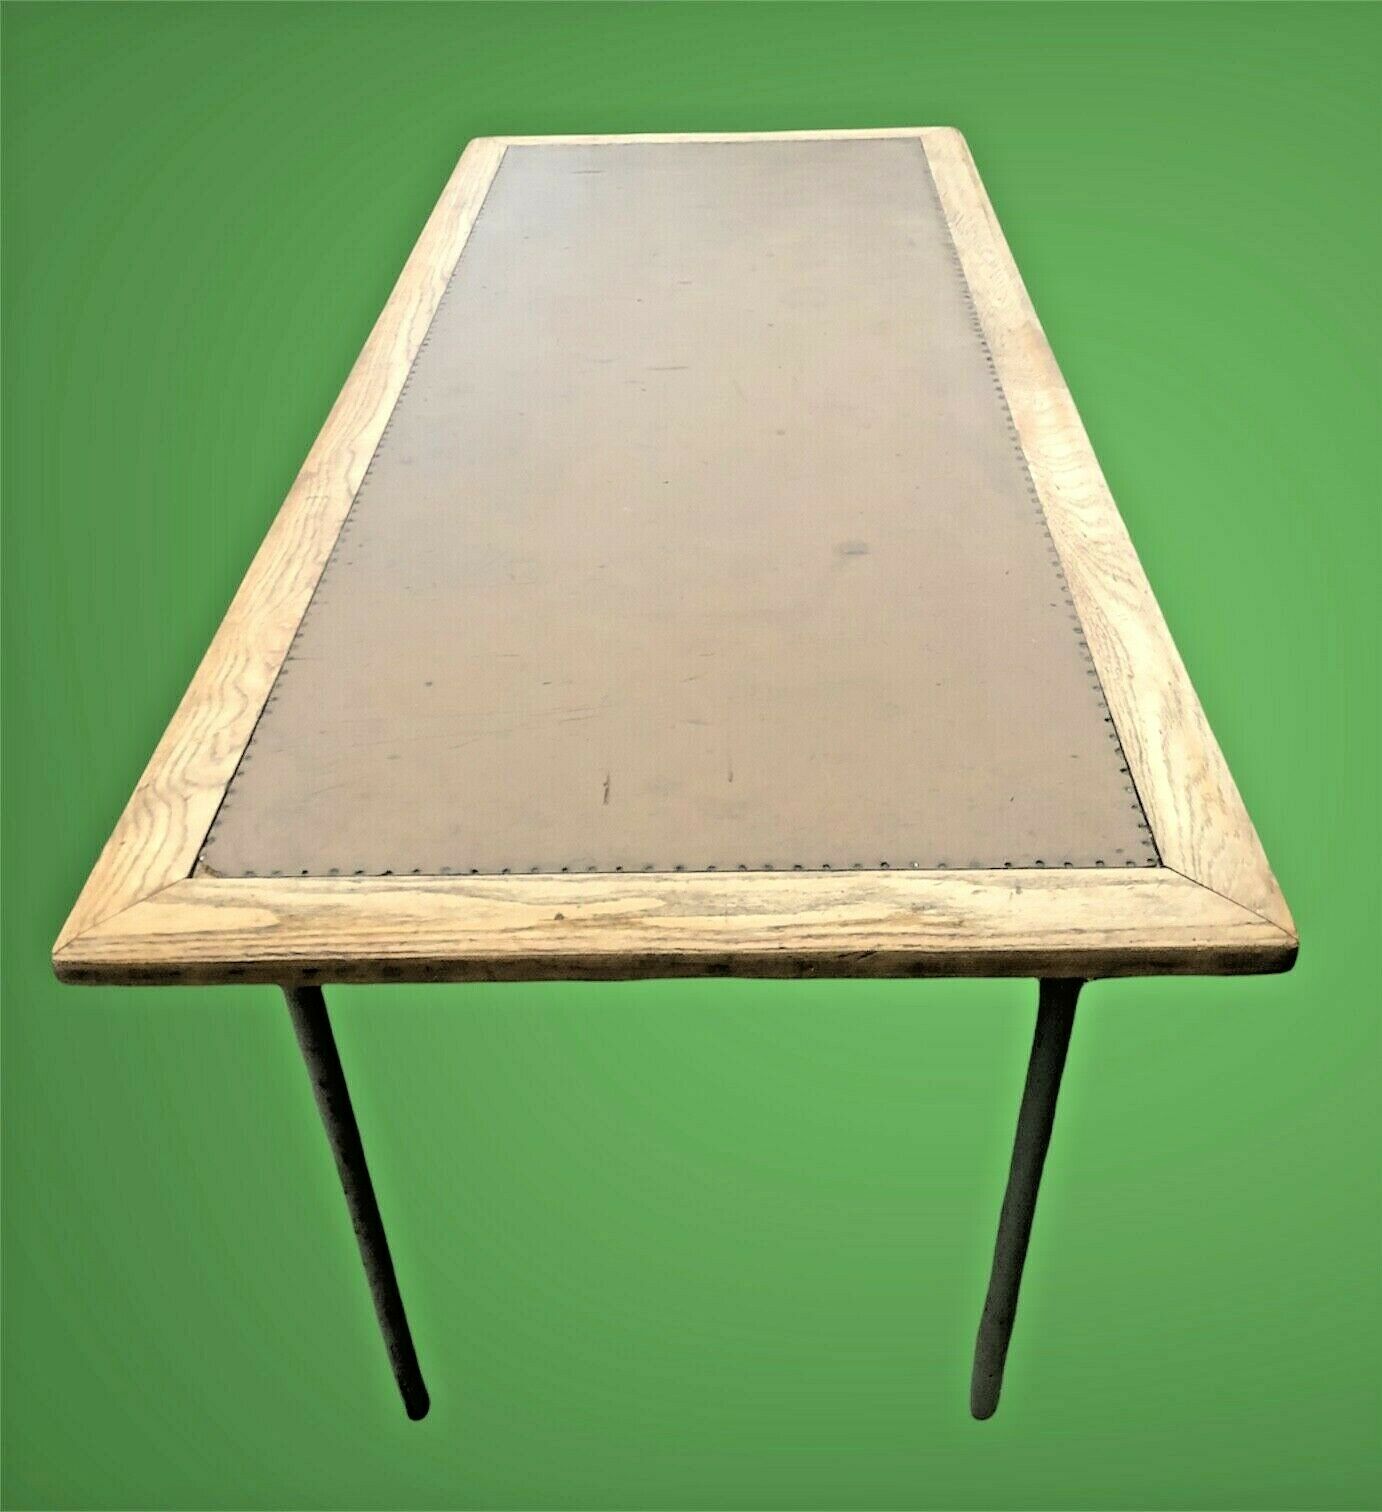 001.....Unique Vintage Upcycled Drapers Table / Dining Table / Work Table ( sold )